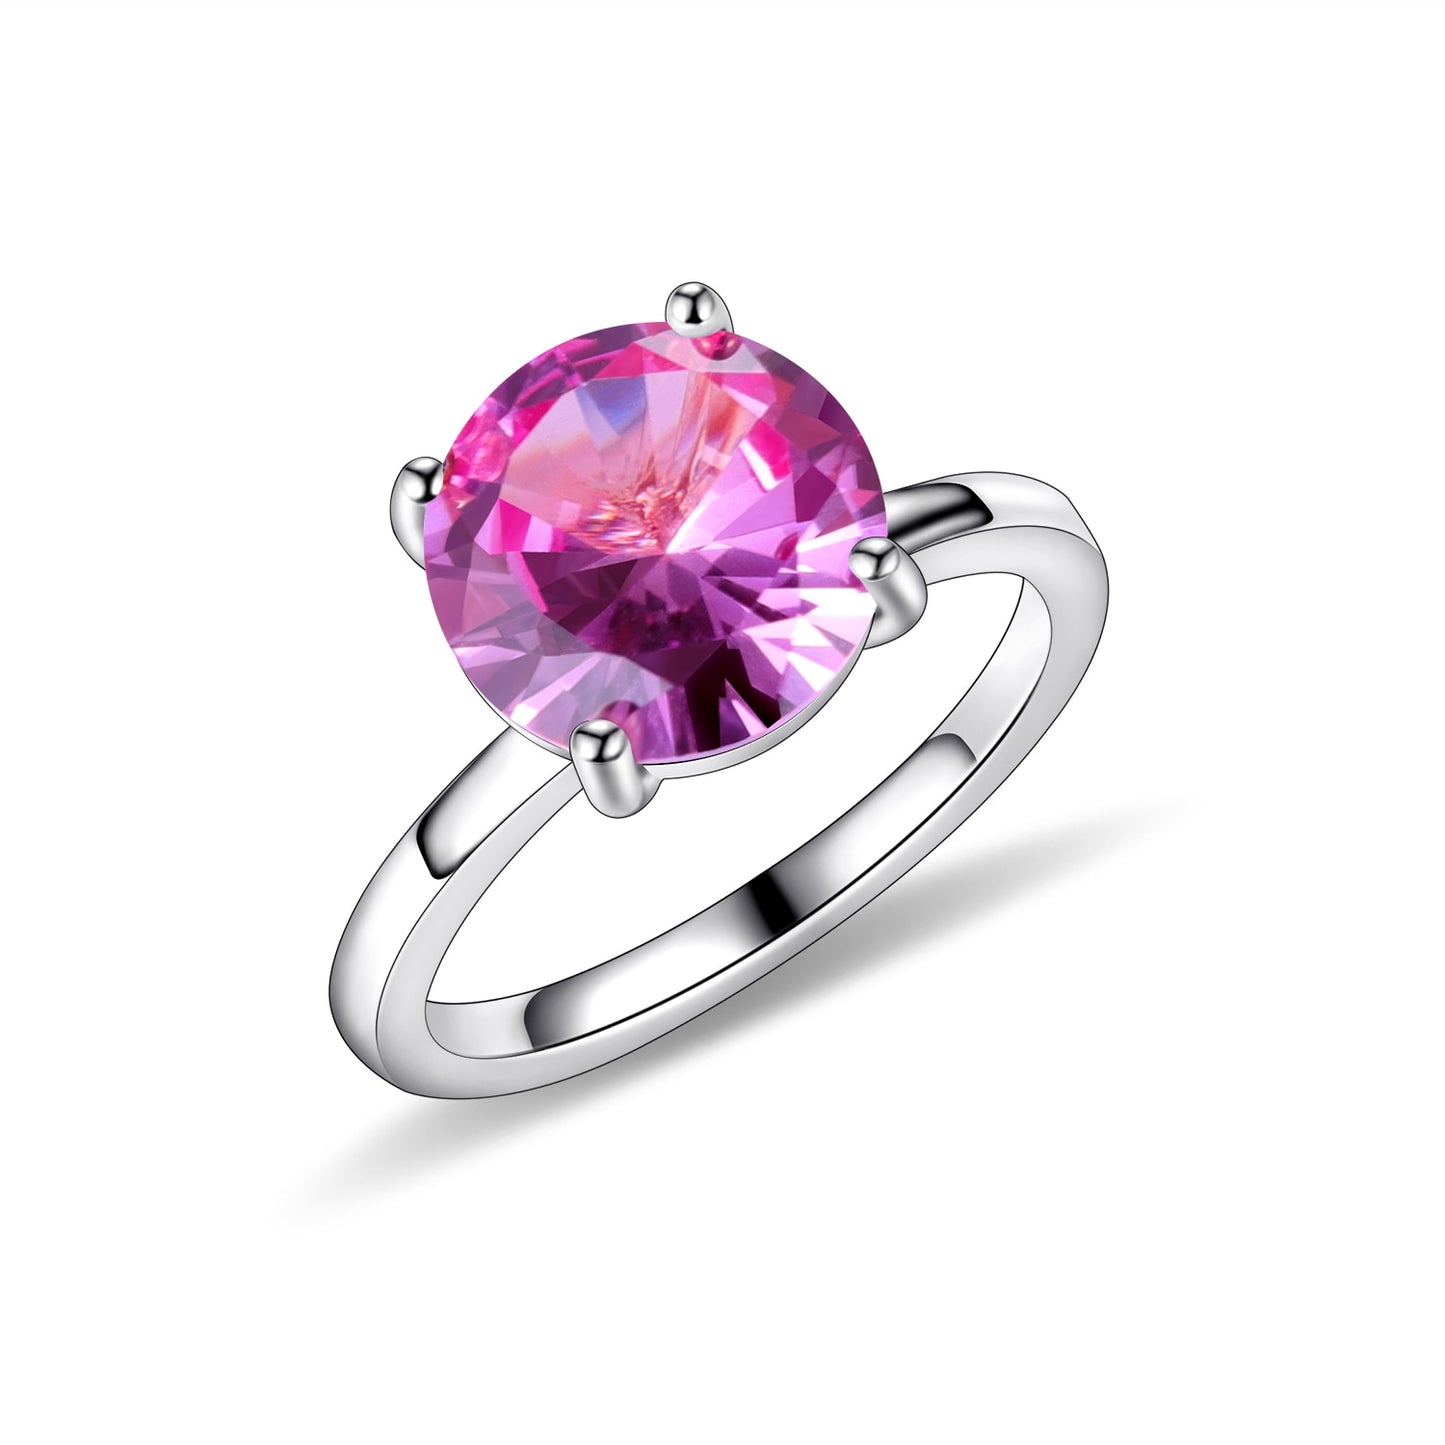 GEM'S BALLET Round Lab Pink Sapphire Four Prong Solitaire Engagement Rings 925 Sterling Silver Anniversary Promise Gift Ring China lab Pink Sapphire|10mm